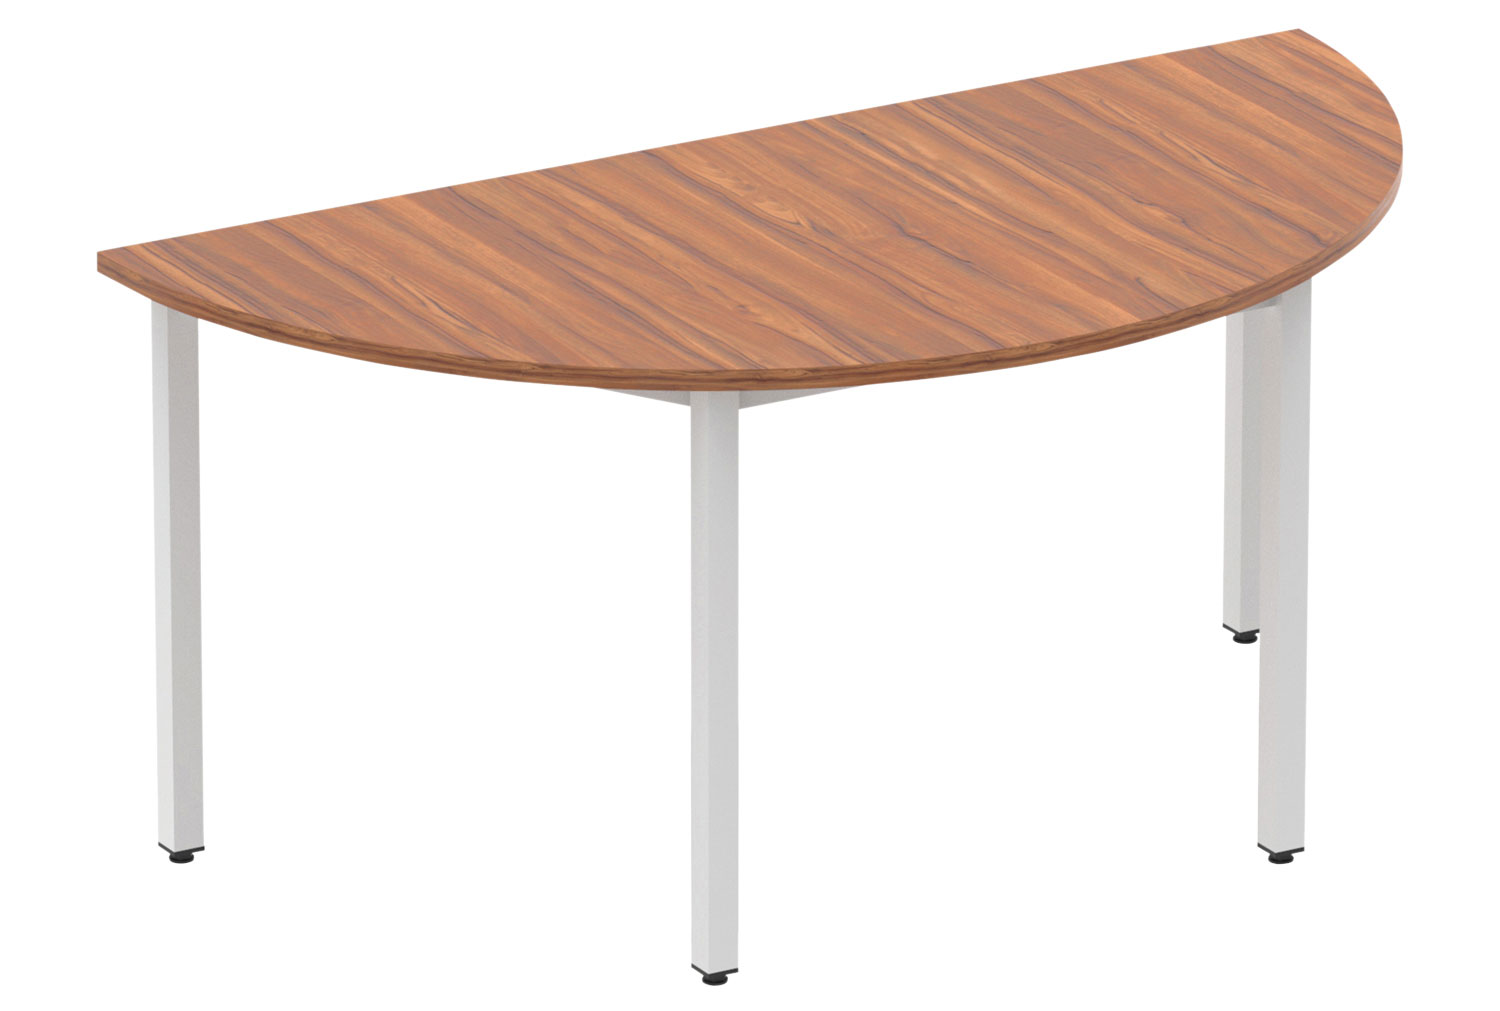 Vitali Semi Circular Meeting Table (Square Legs), 160wx80dx73h (cm), Silver Frame, Walnut, Express Delivery